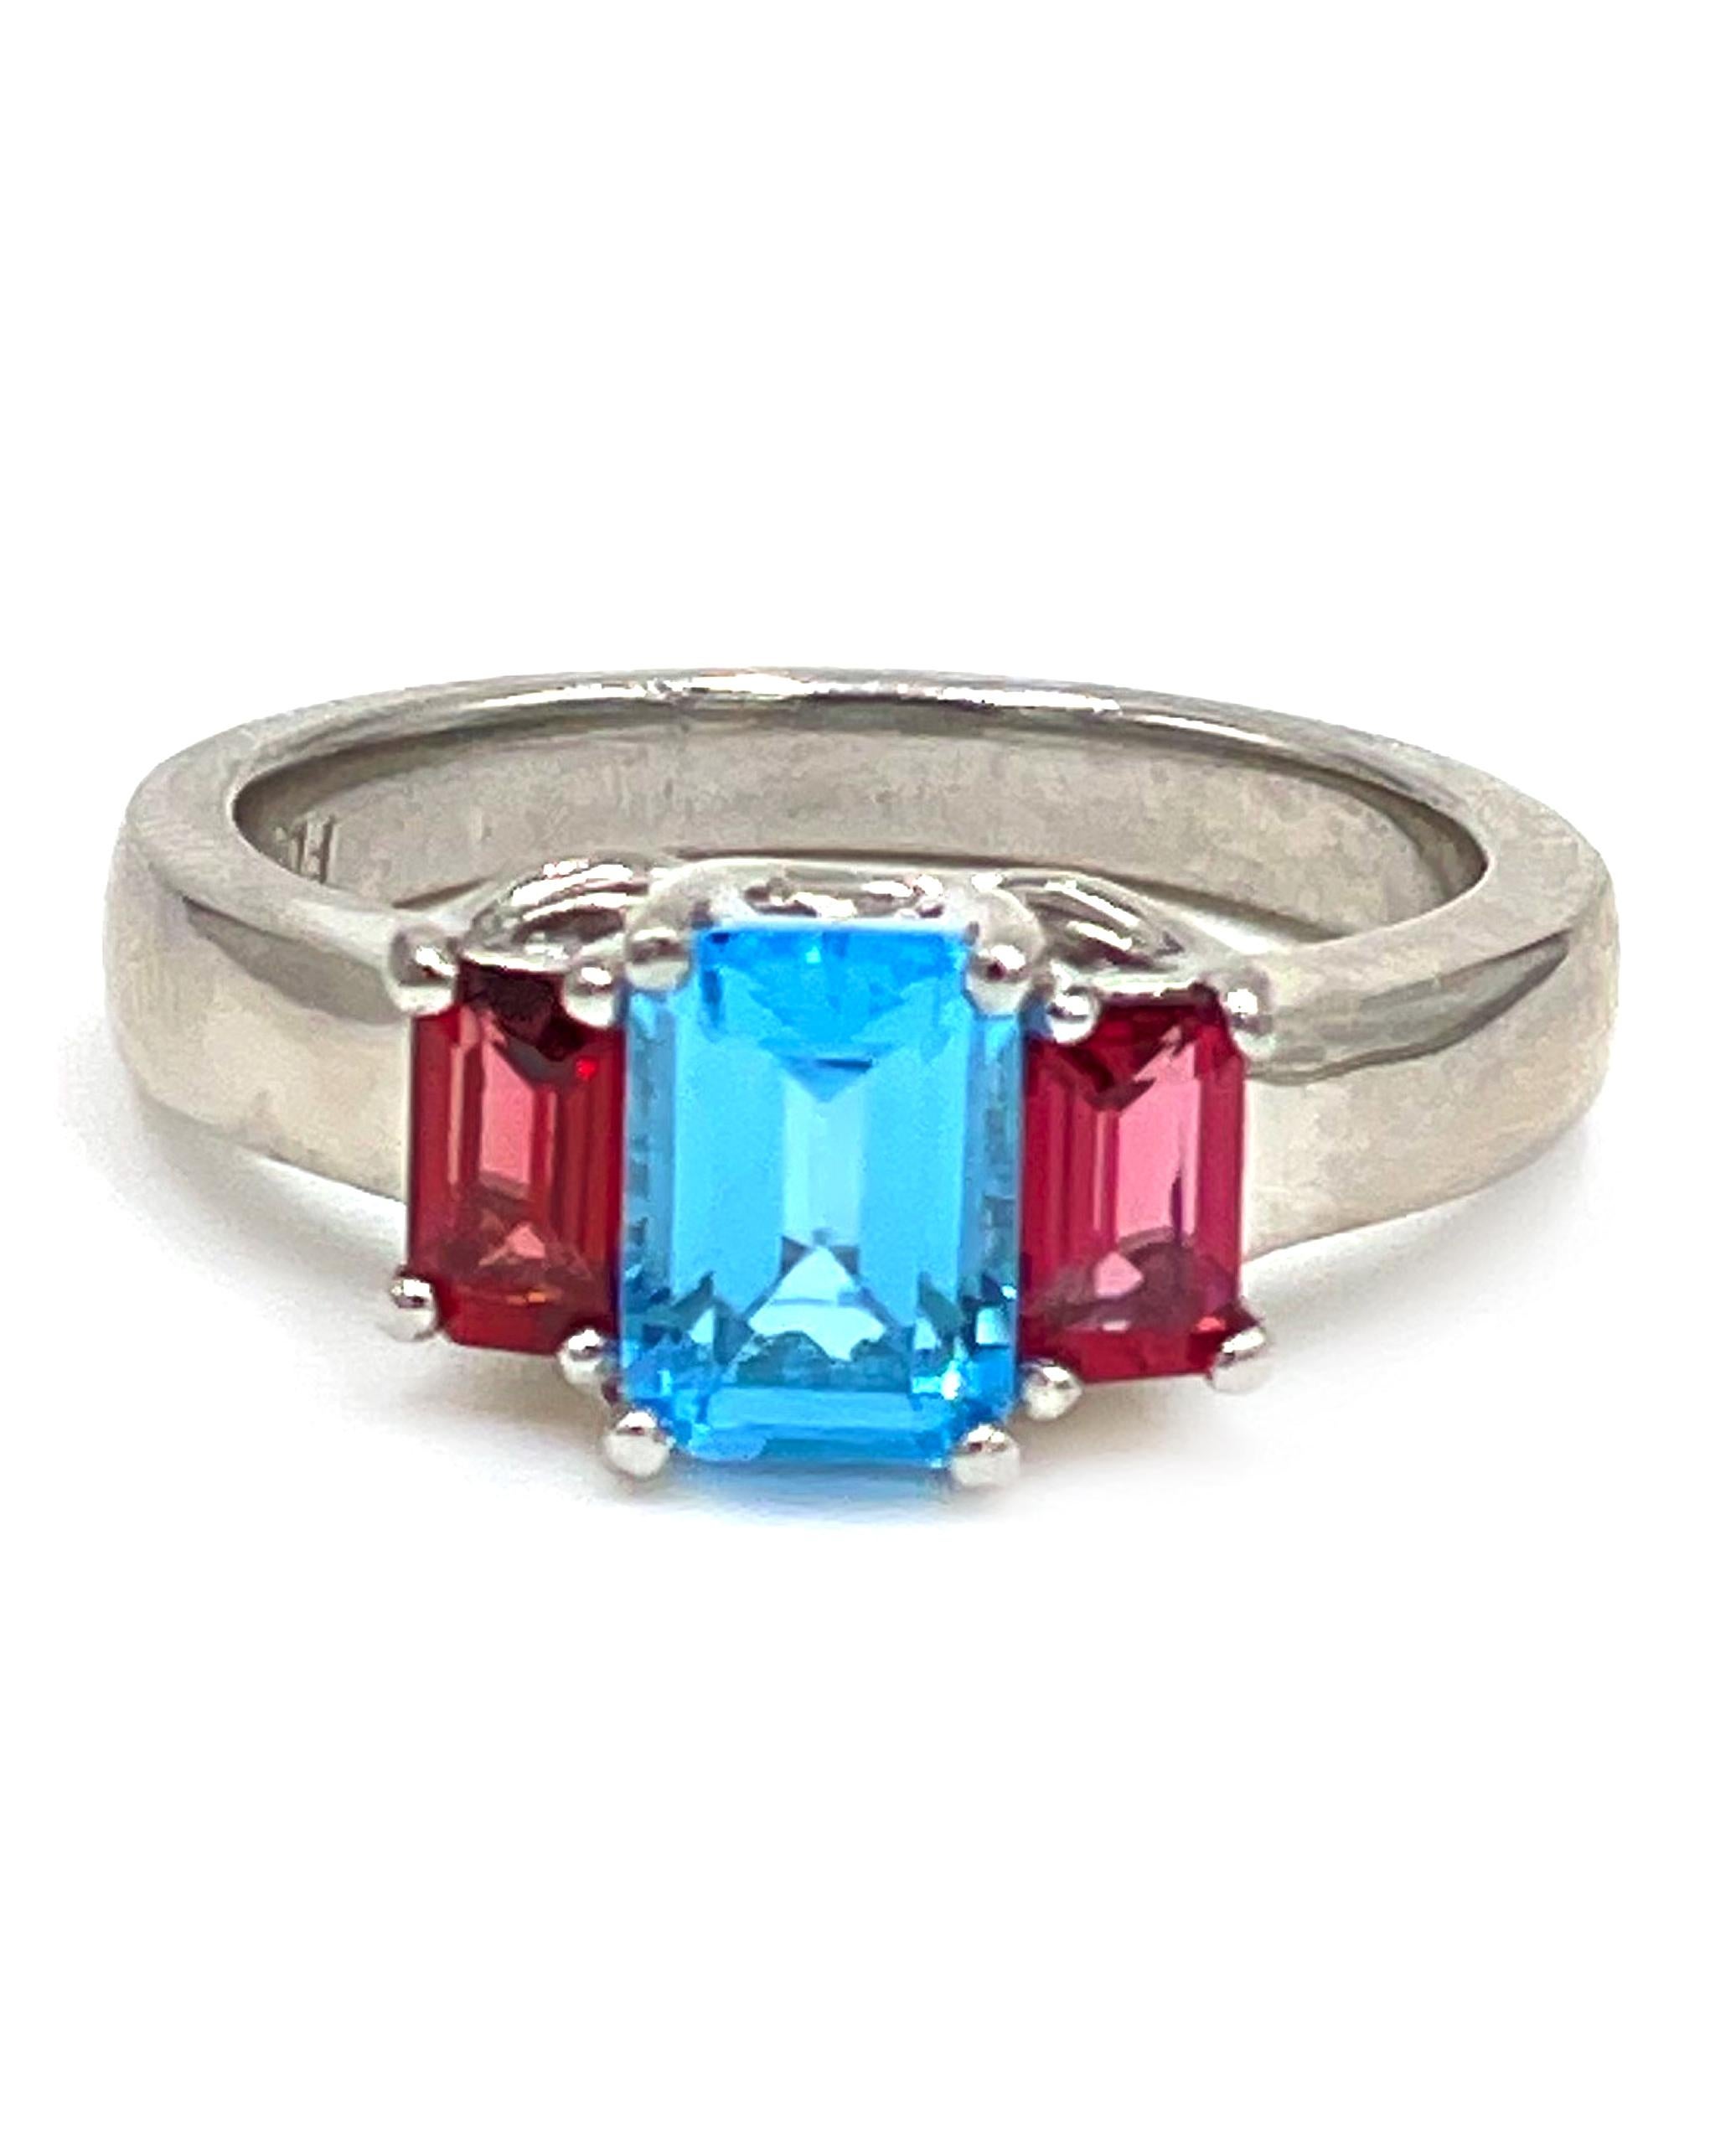 Platinum three stone Lucida set ring with two step cut pink tourmaline 0.75 carats and one center step cut sky blue topaz 1.35 carats.

- Finger size 6